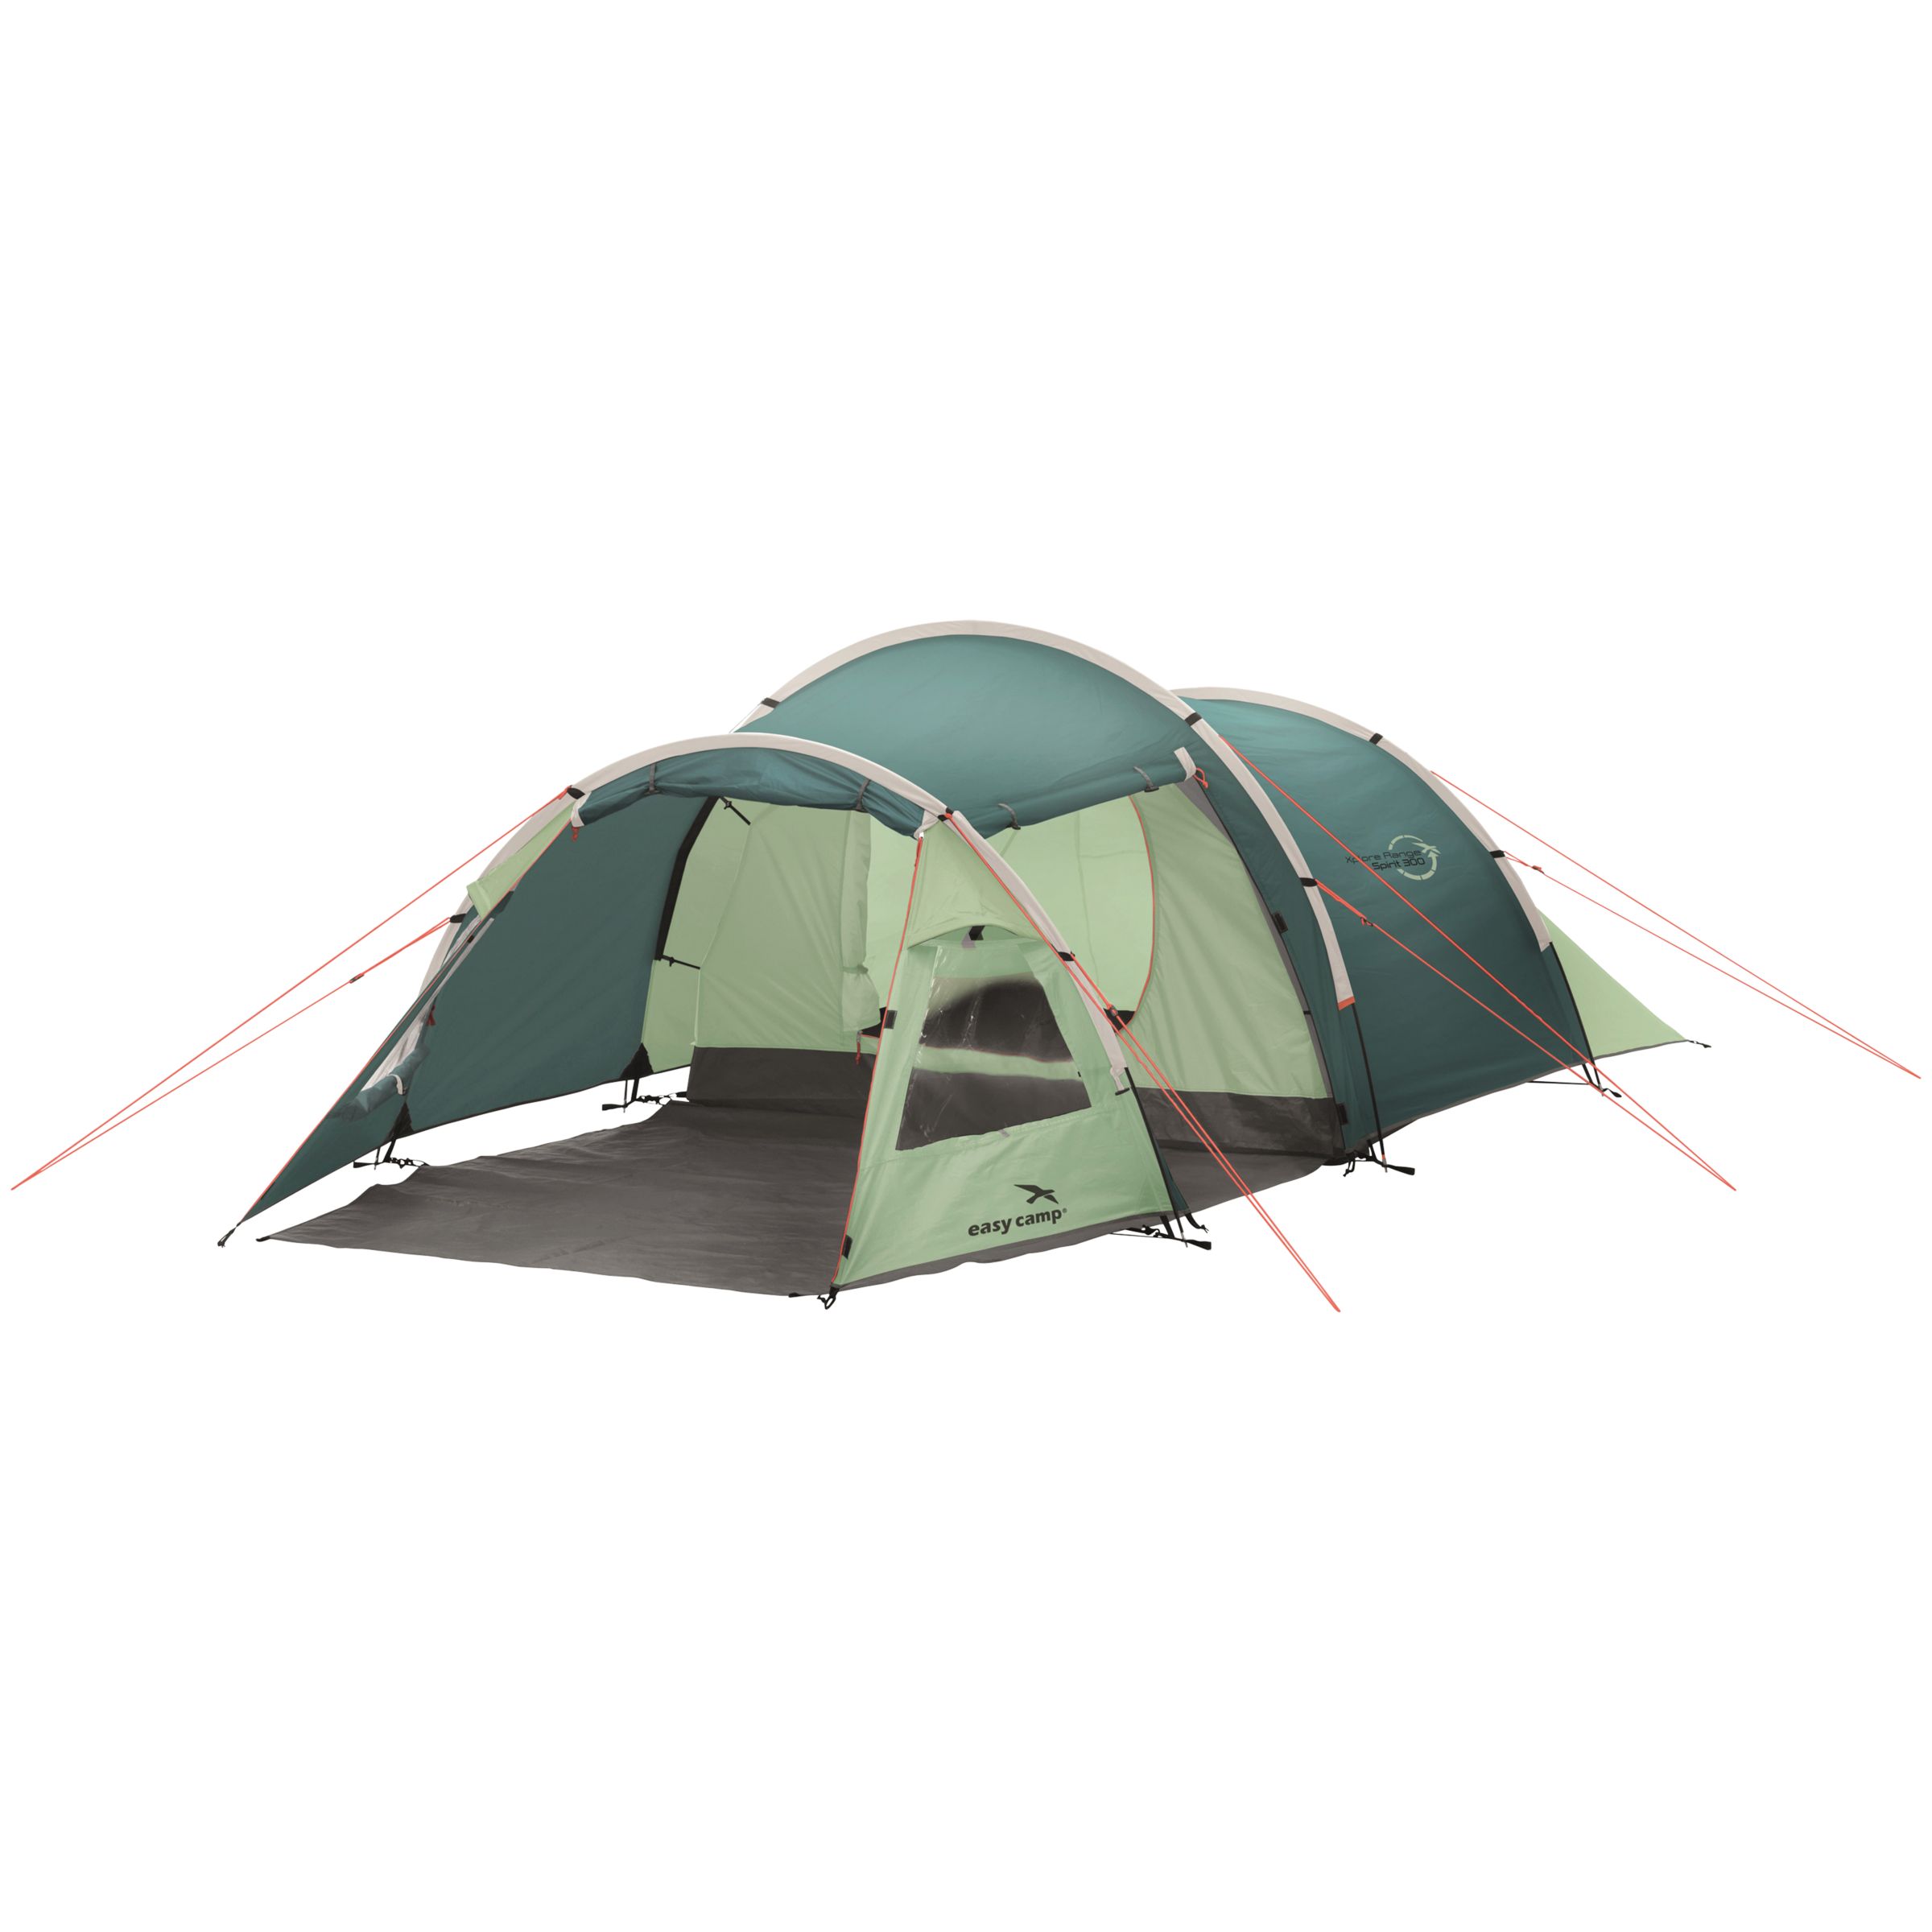 Easy Camp Spirit 300 Camping Tent